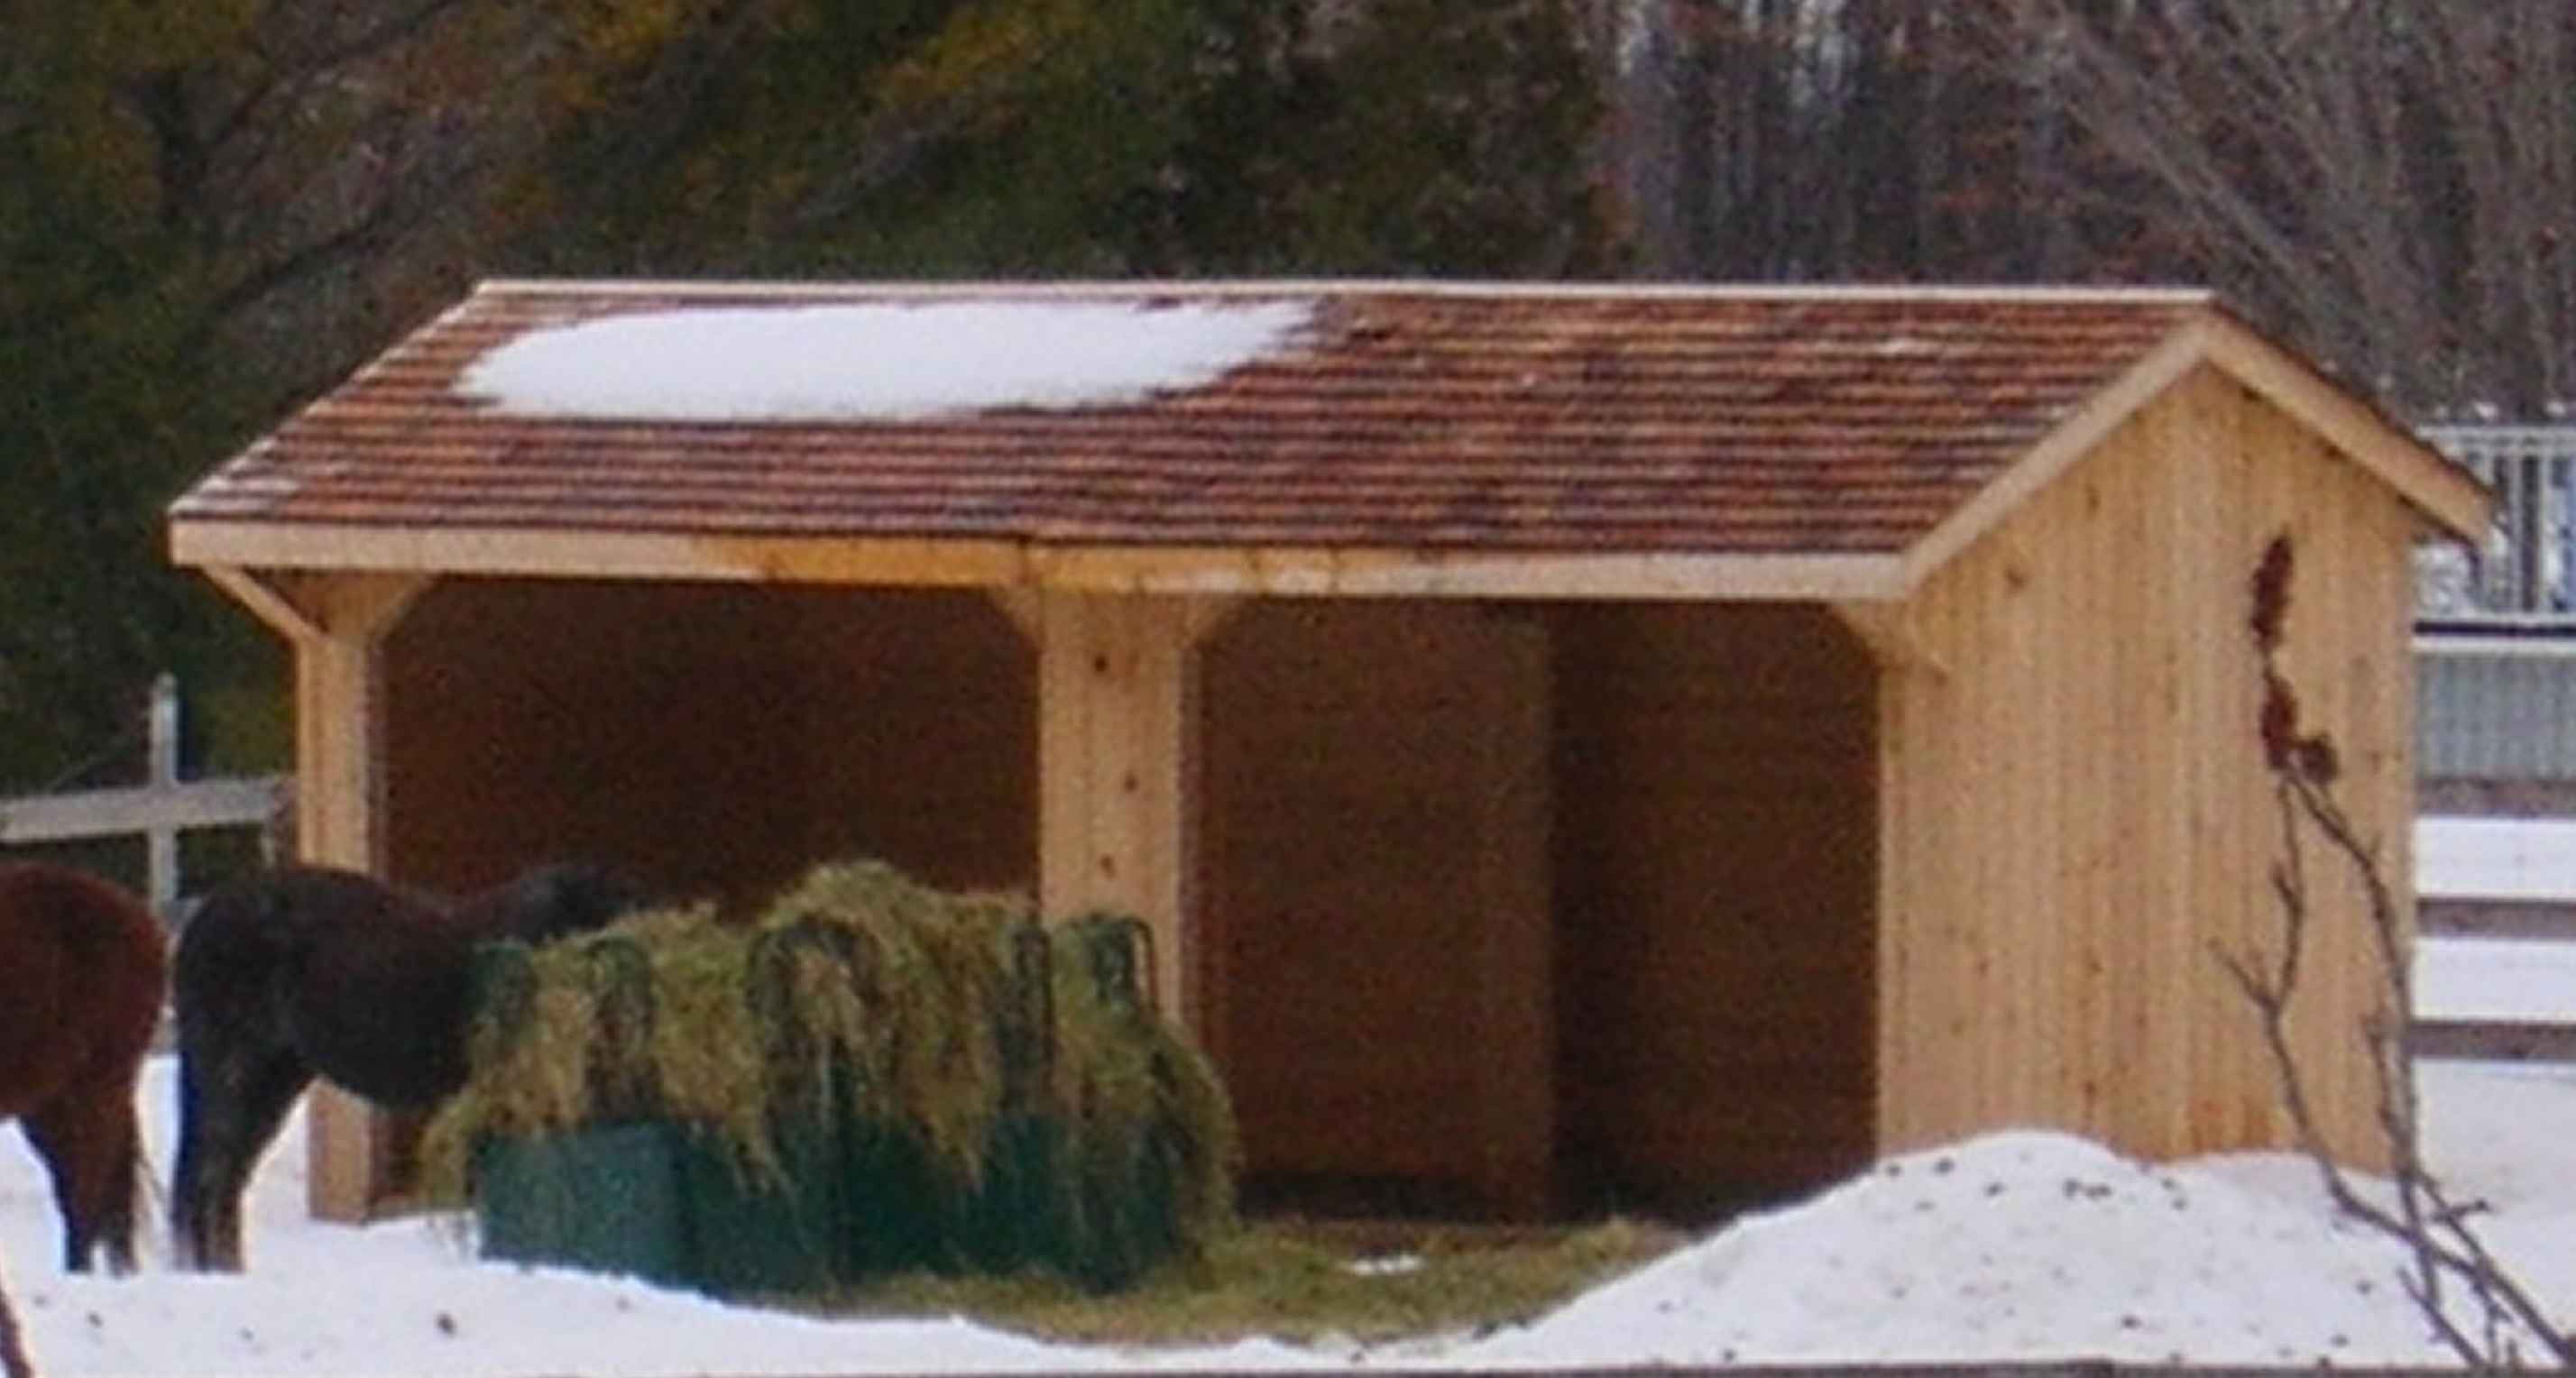 Free Run In Shed Plans Horse run in shed-plans to build a 